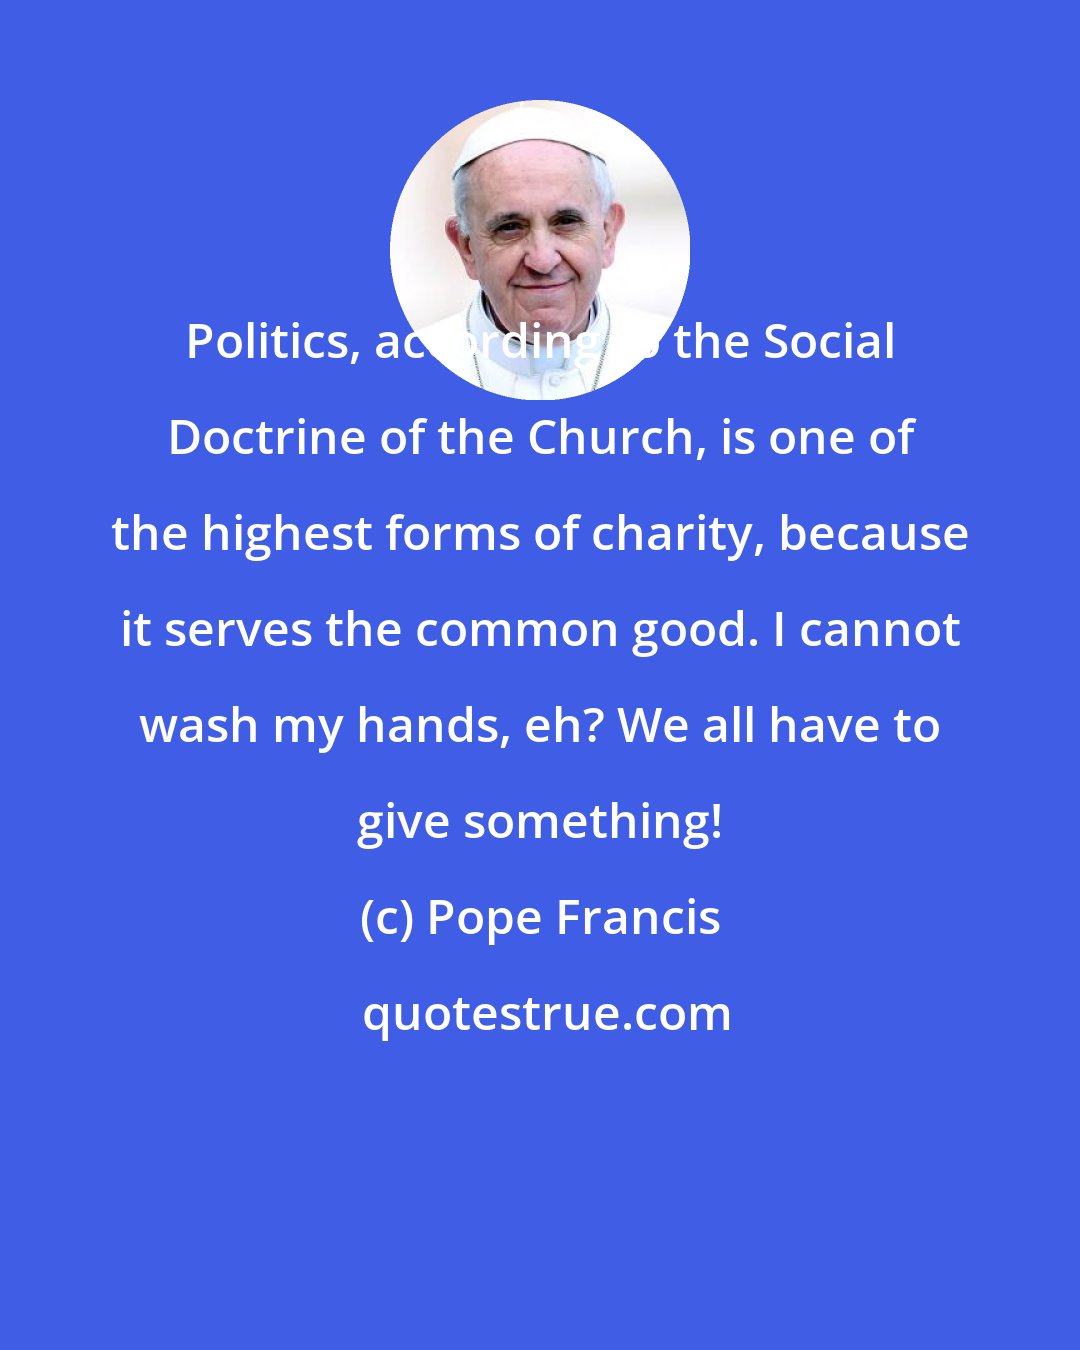 Pope Francis: Politics, according to the Social Doctrine of the Church, is one of the highest forms of charity, because it serves the common good. I cannot wash my hands, eh? We all have to give something!